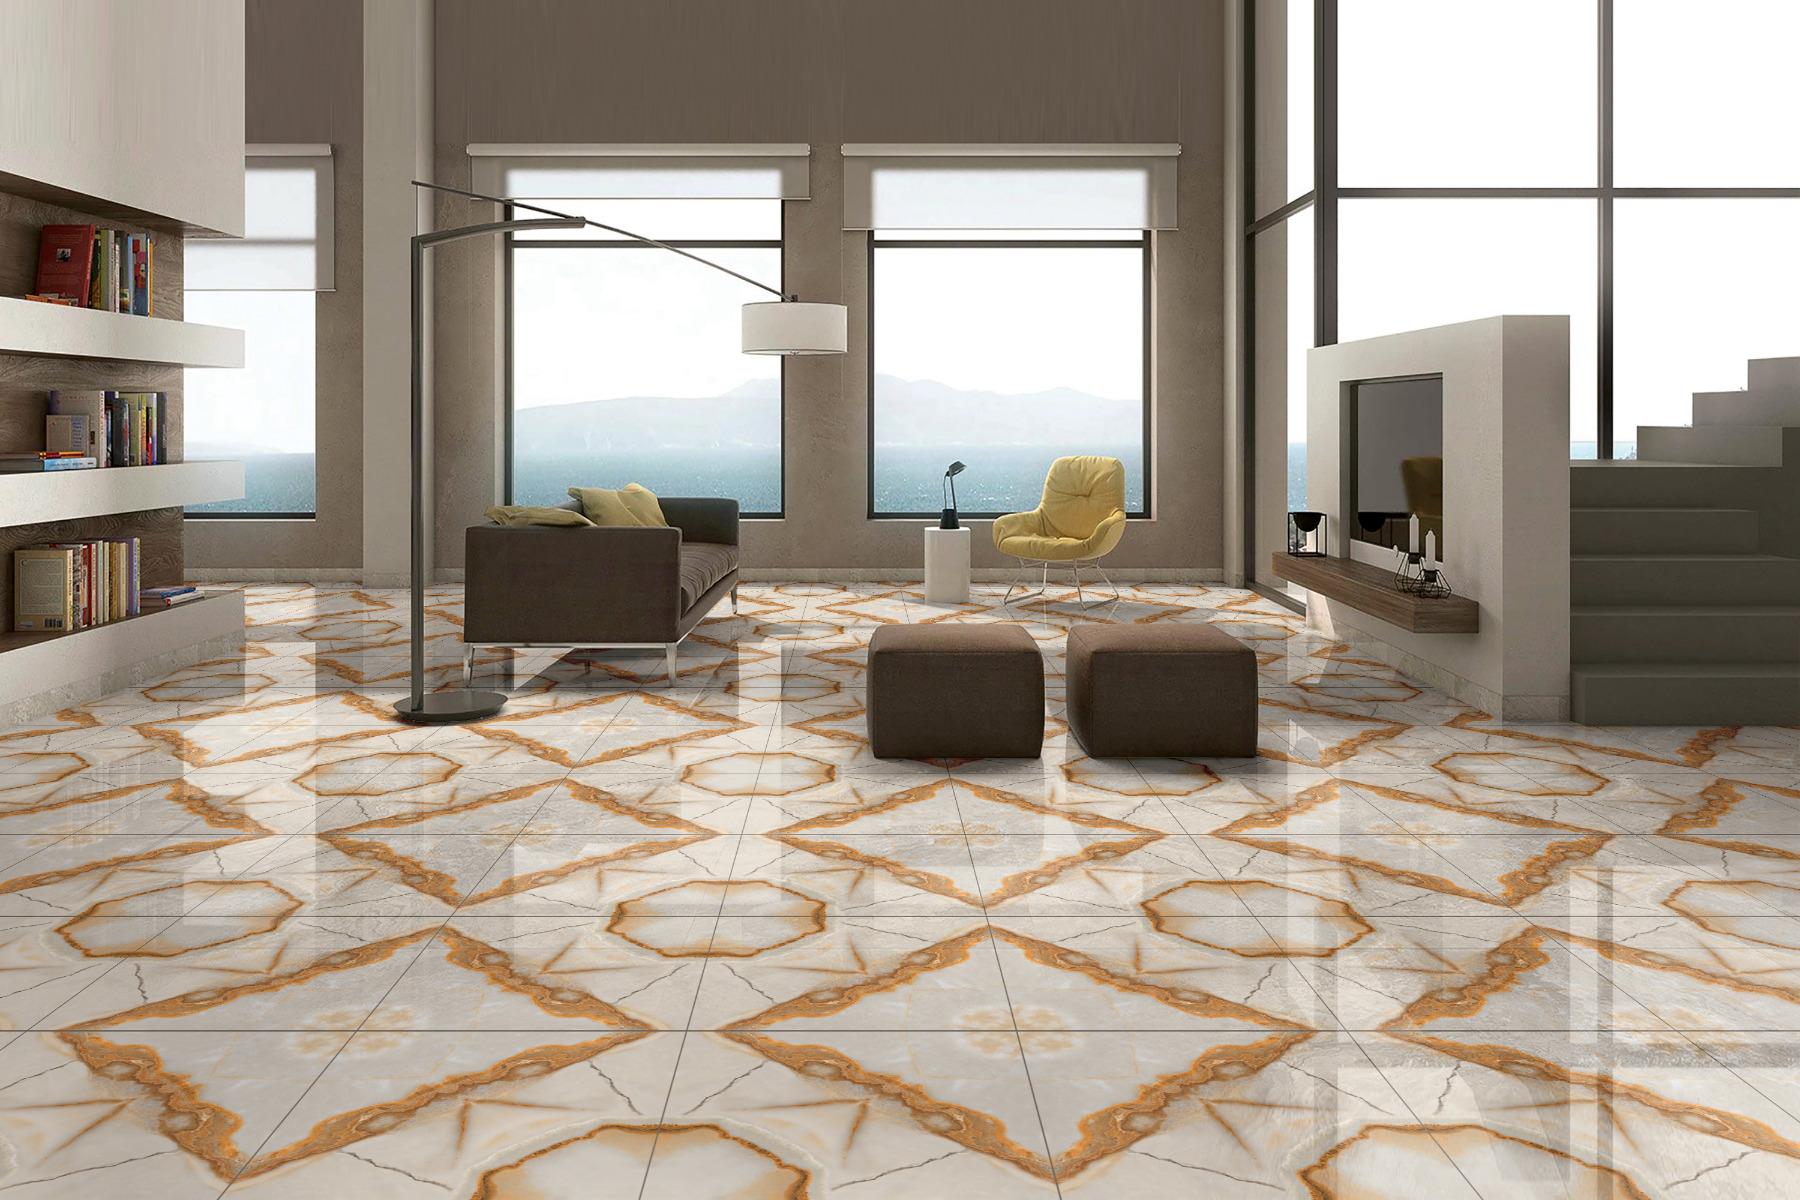 Size up on seamless luxury with these 35 large tile designs - Architect and  Interiors India